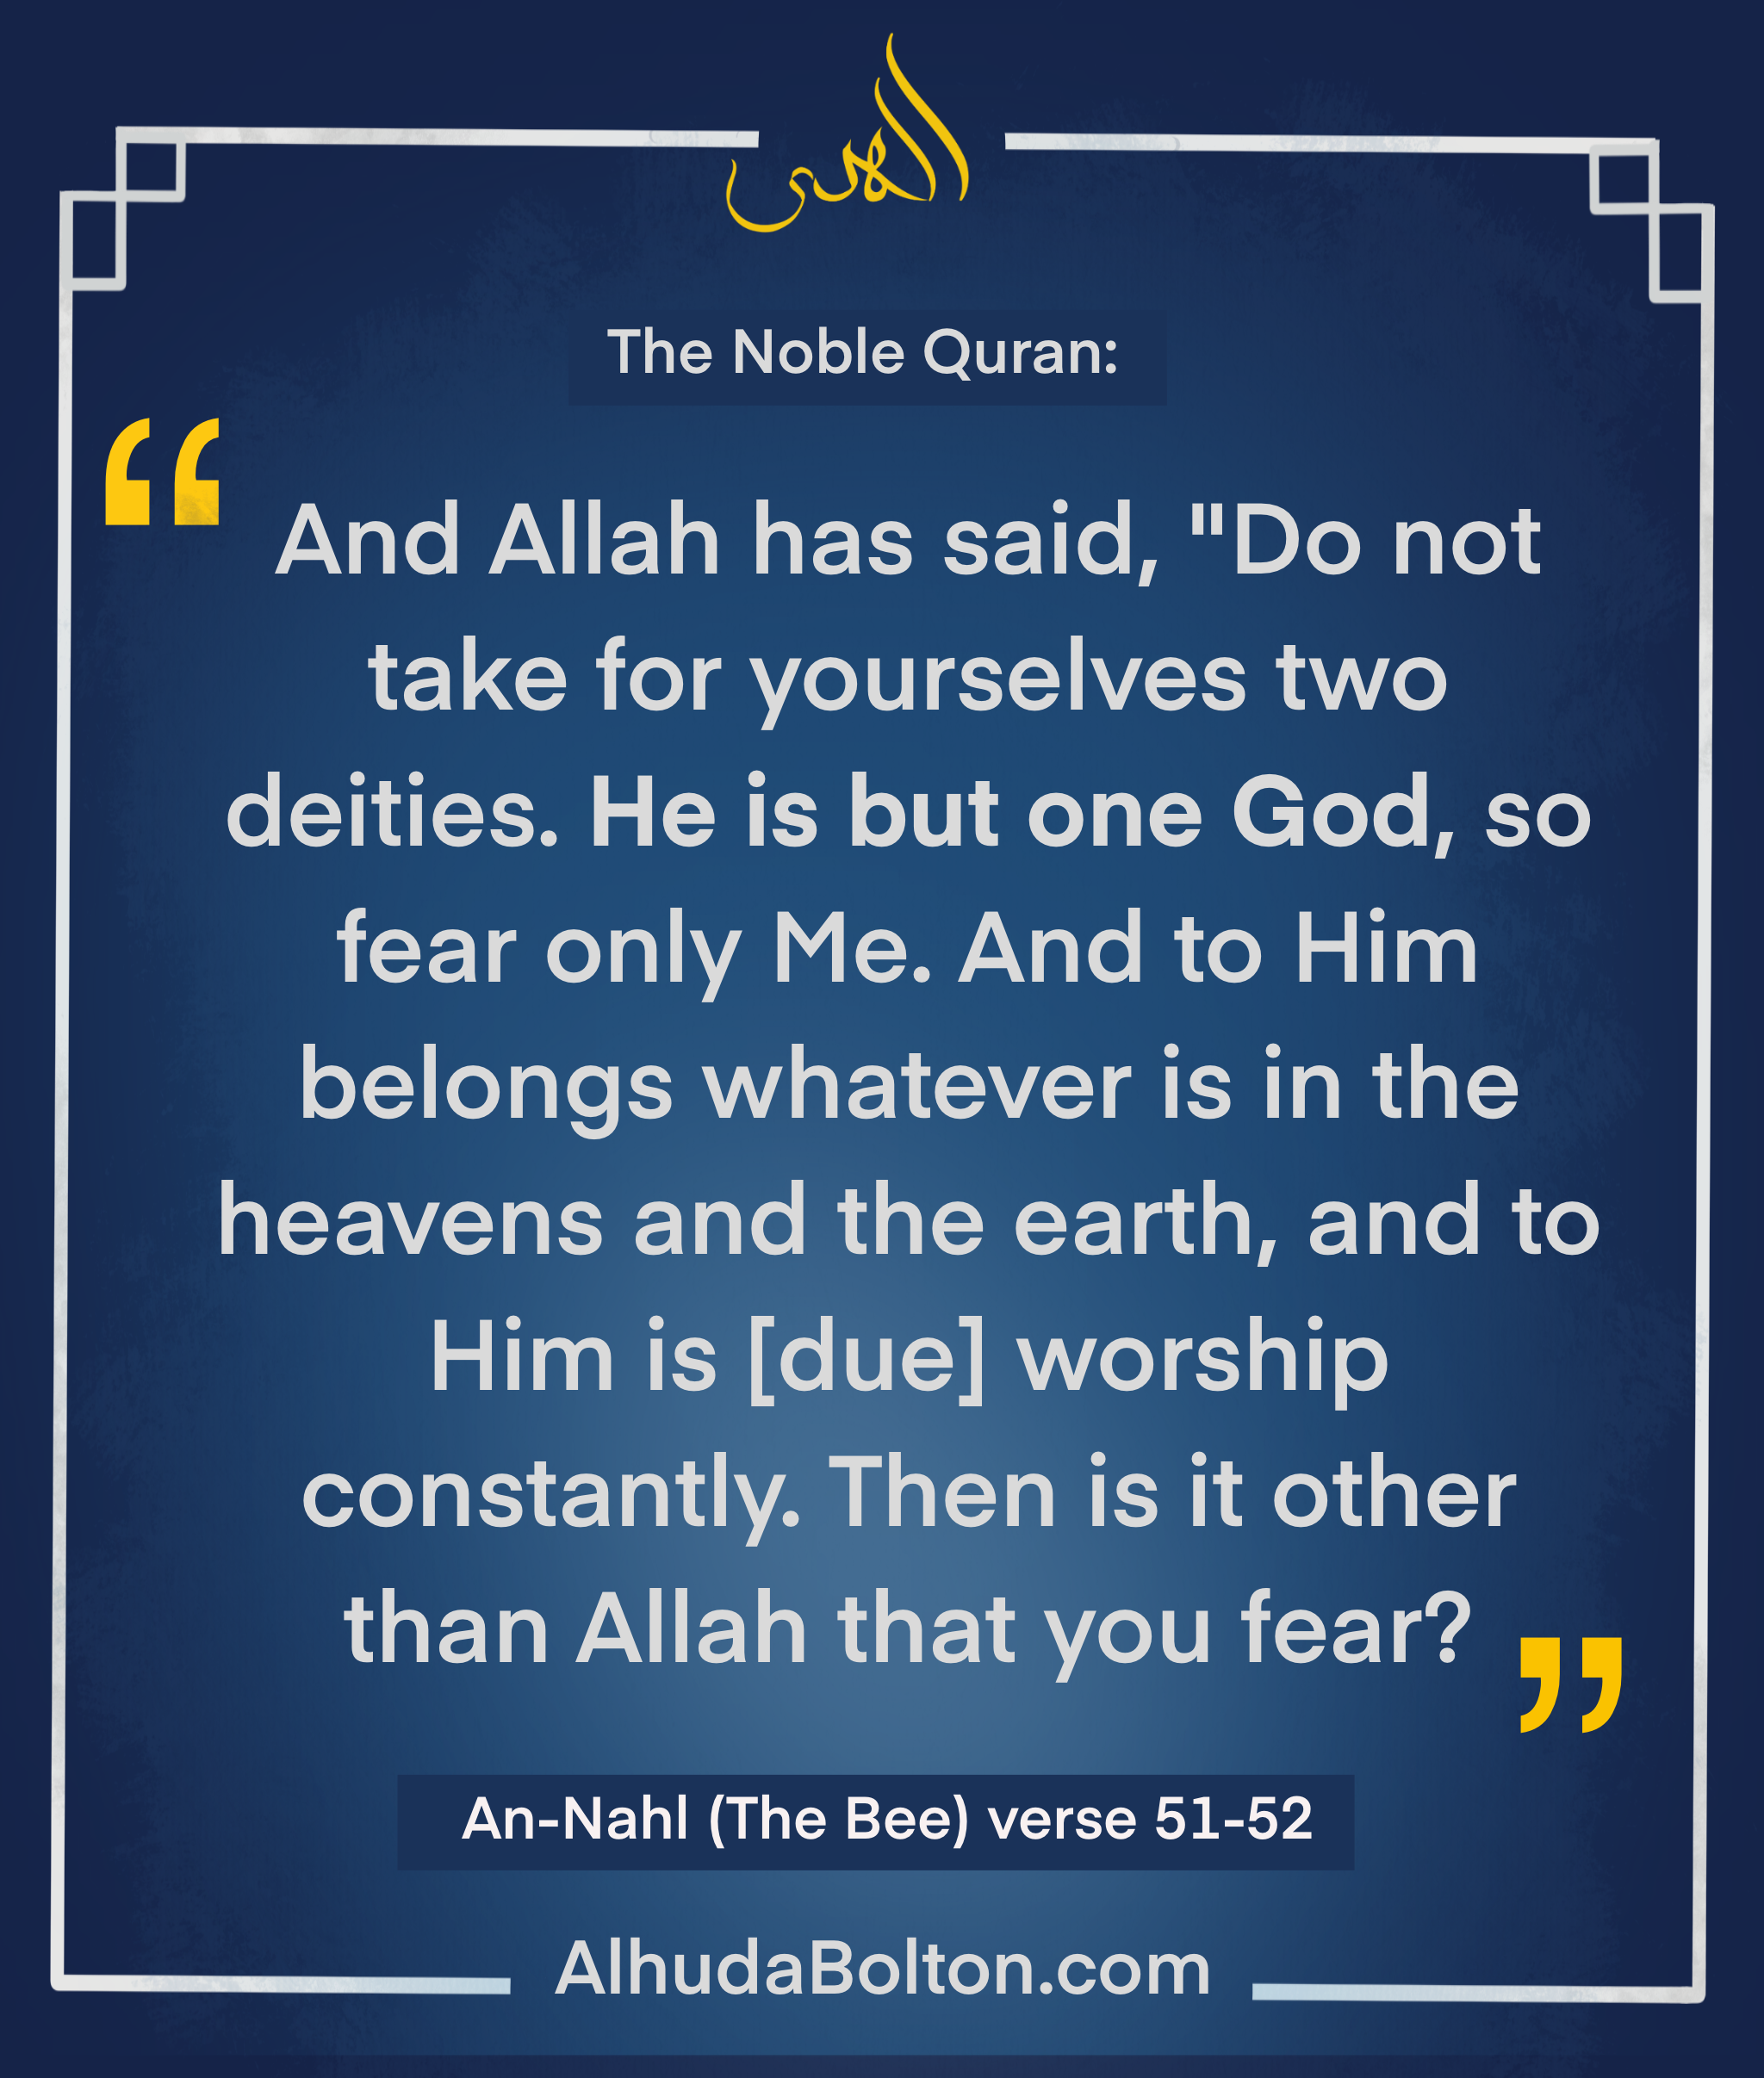 Quran Verse: “He is but one God”